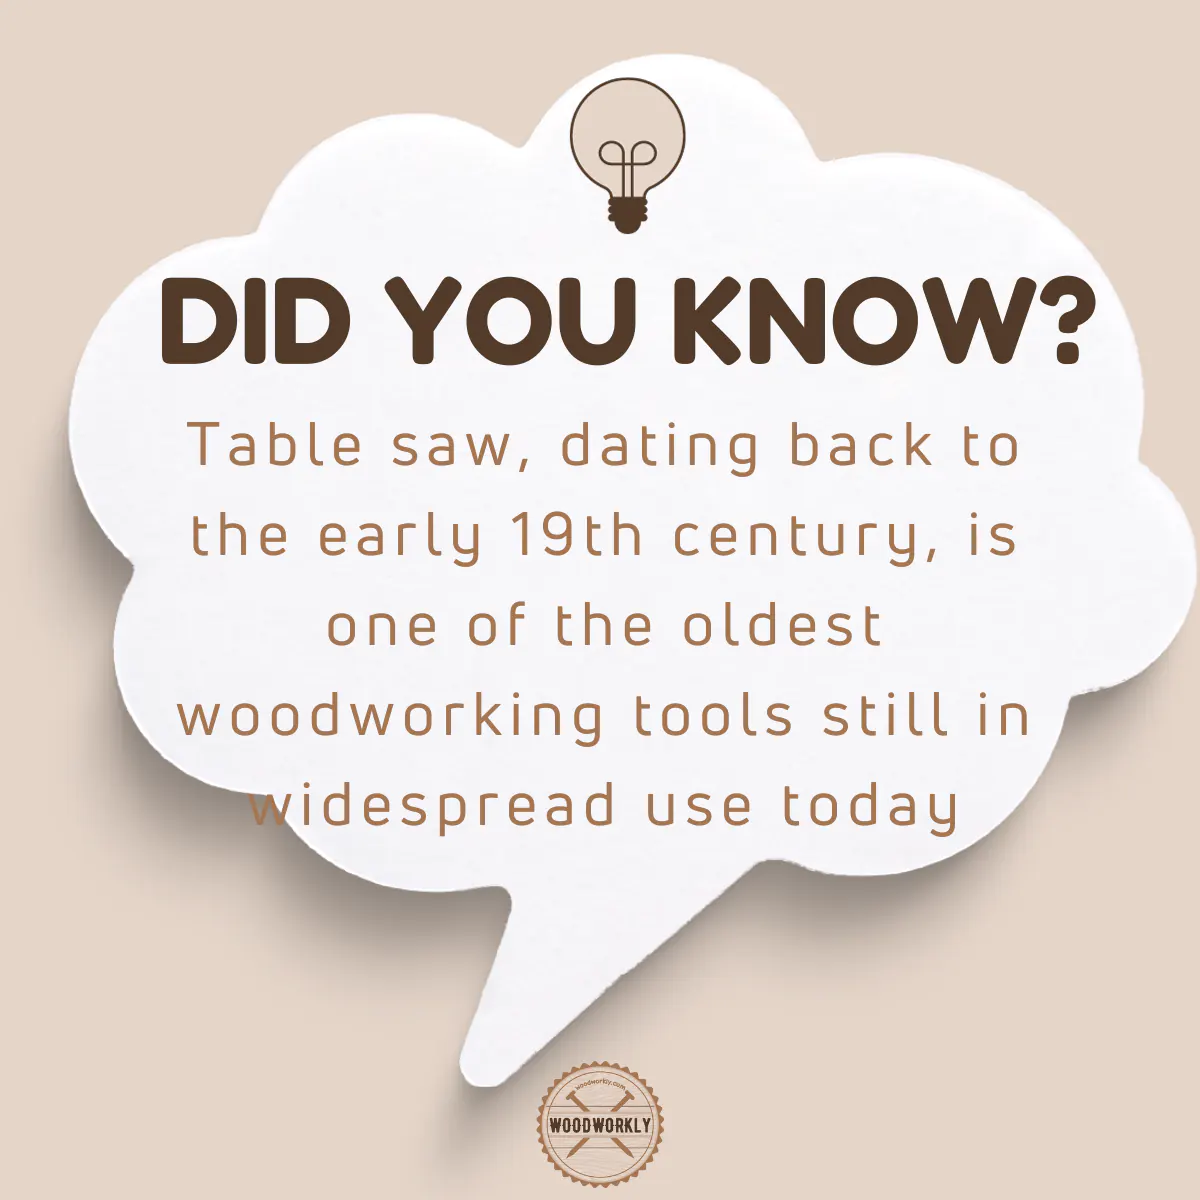 Did you know fact about Table Saw